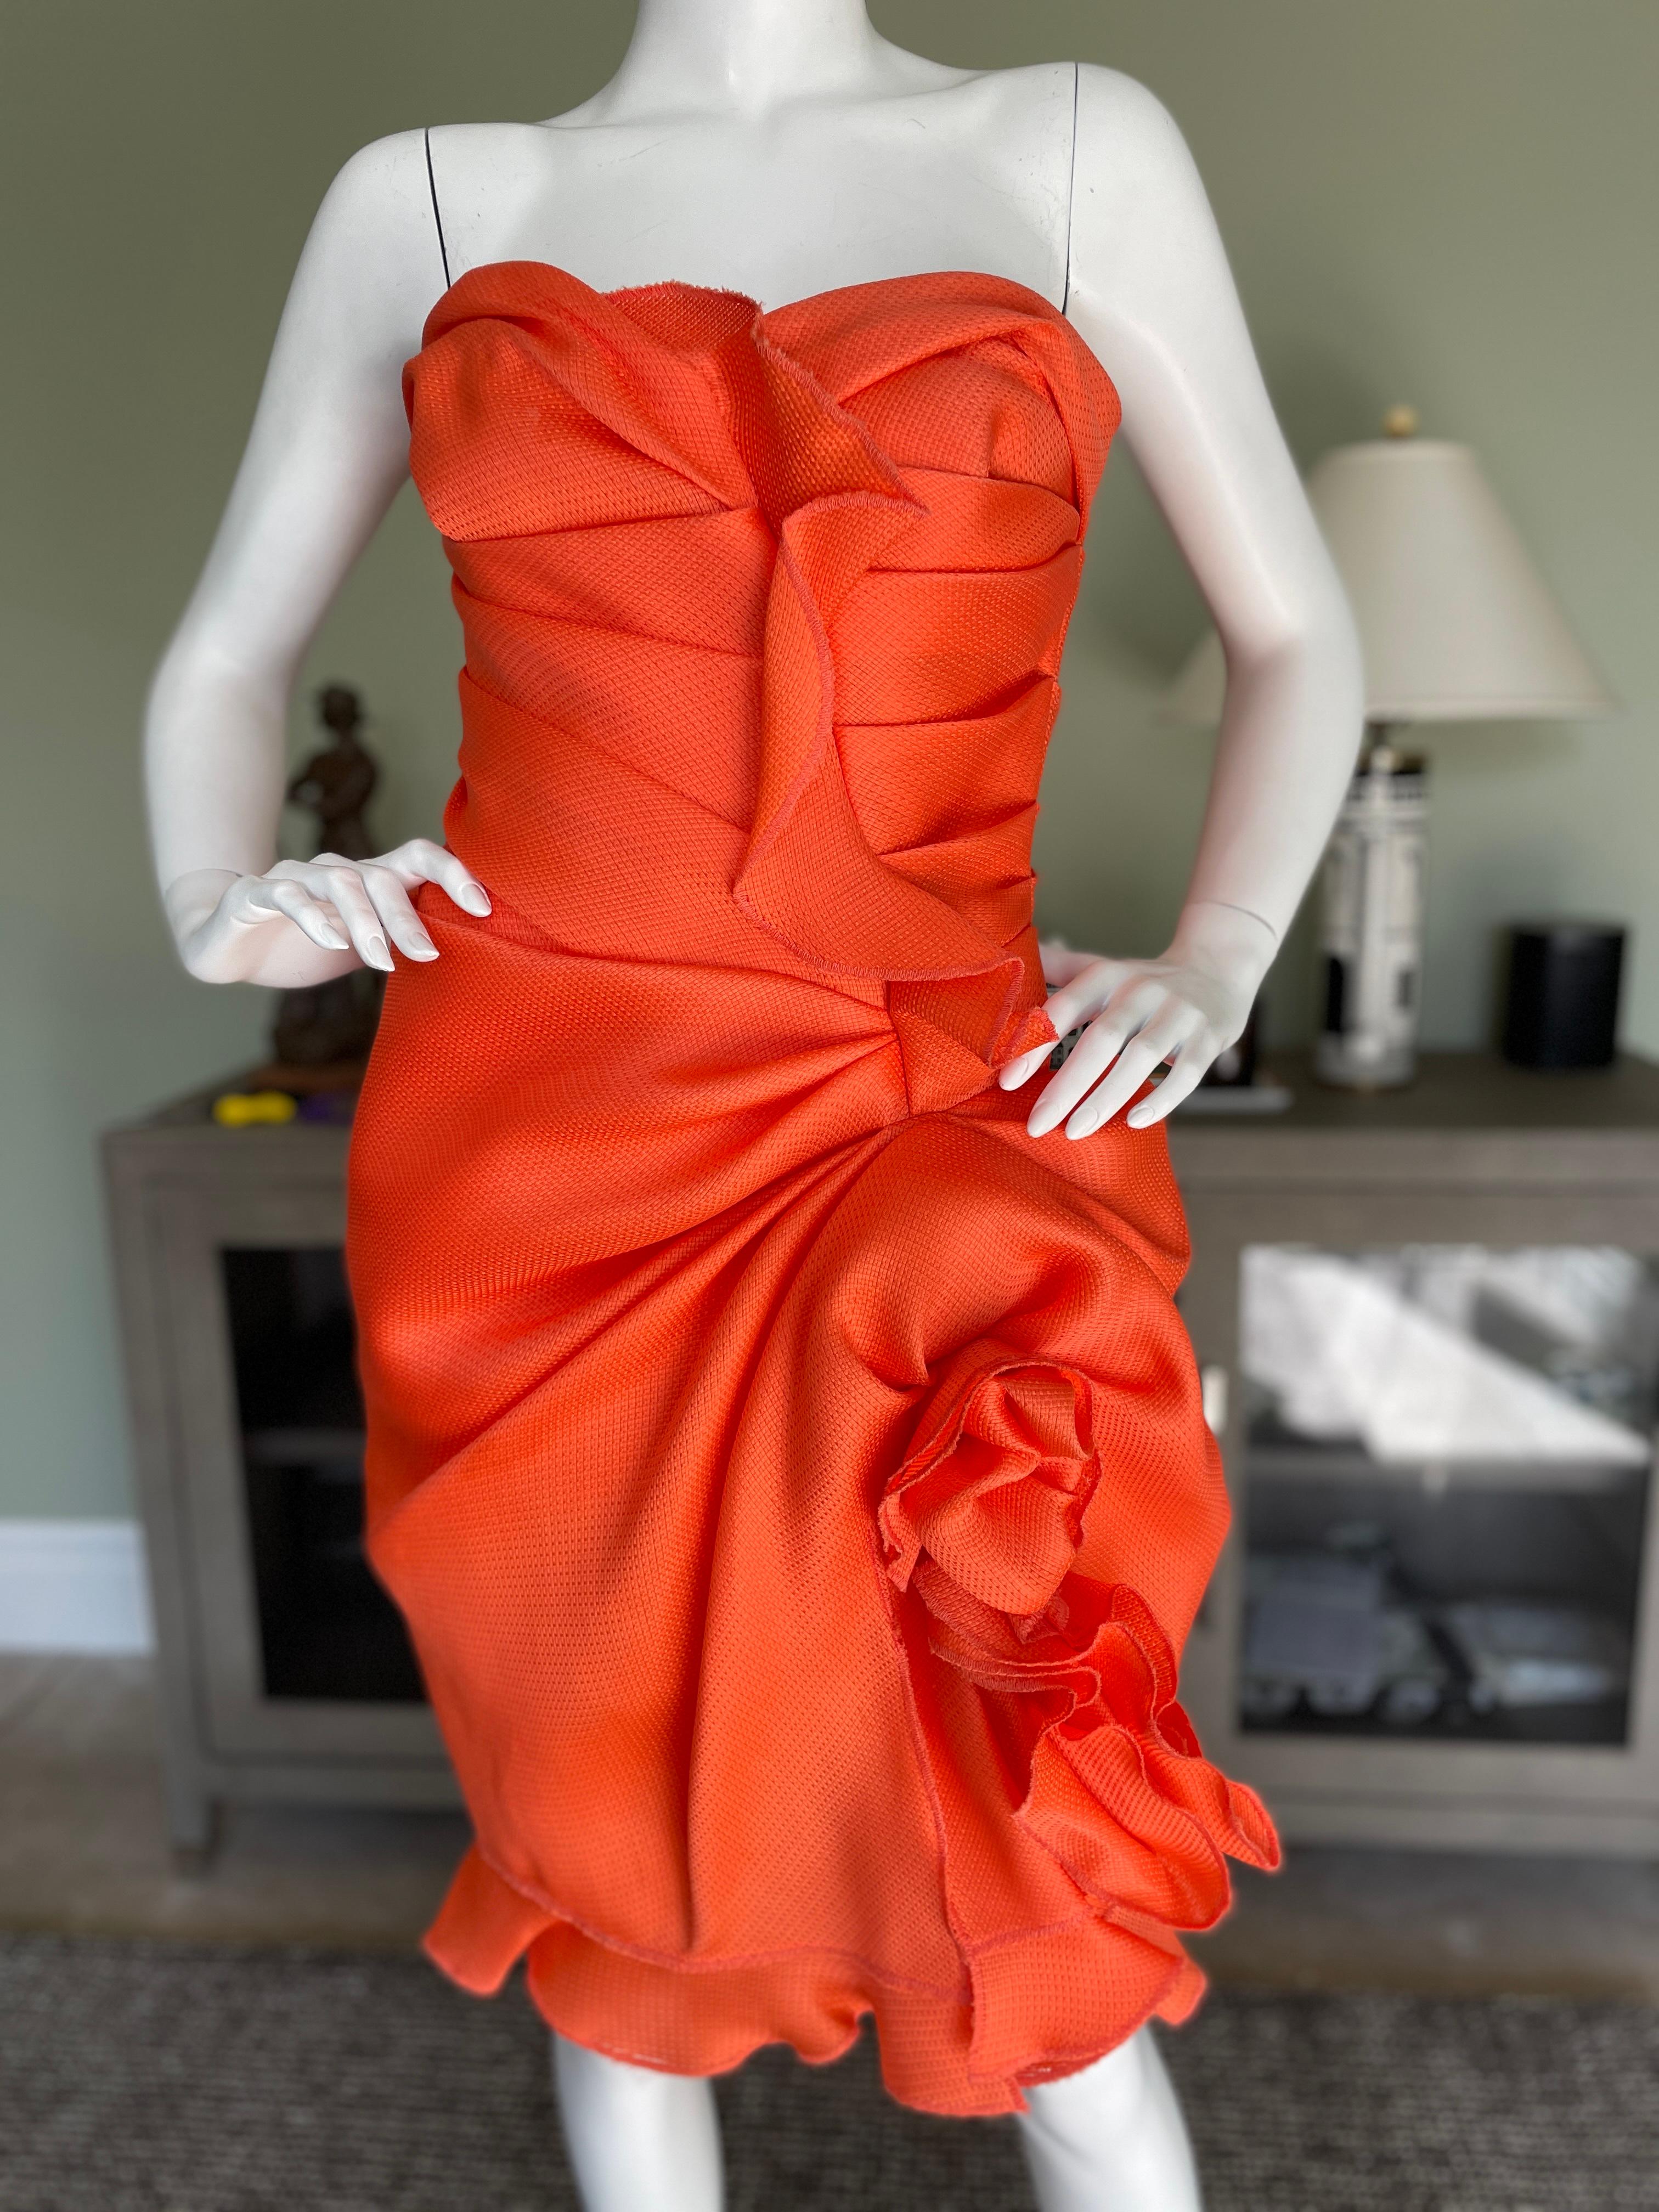 Oscar de la Renta Sculptural Vintage Orange Textured Silk Corset Cocktail Dress
Stunning. Full inner corset.
Please use the zoom feature to see all the details
Size 8
Bust 34